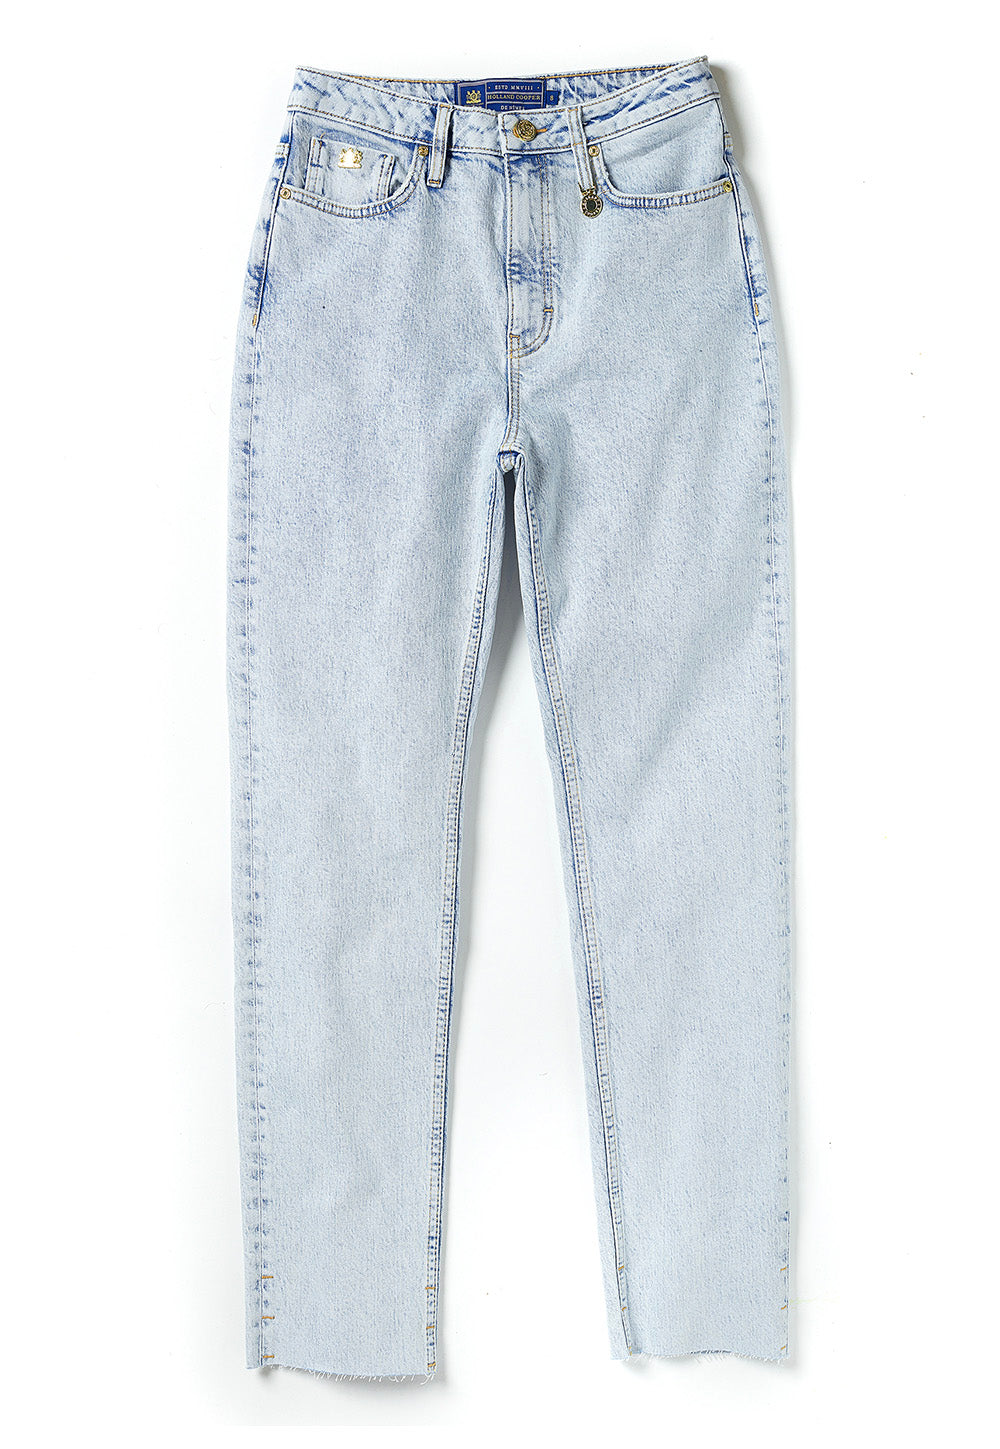 High Rise Slim Jean - Light Stone Wash sold by Angel Divine